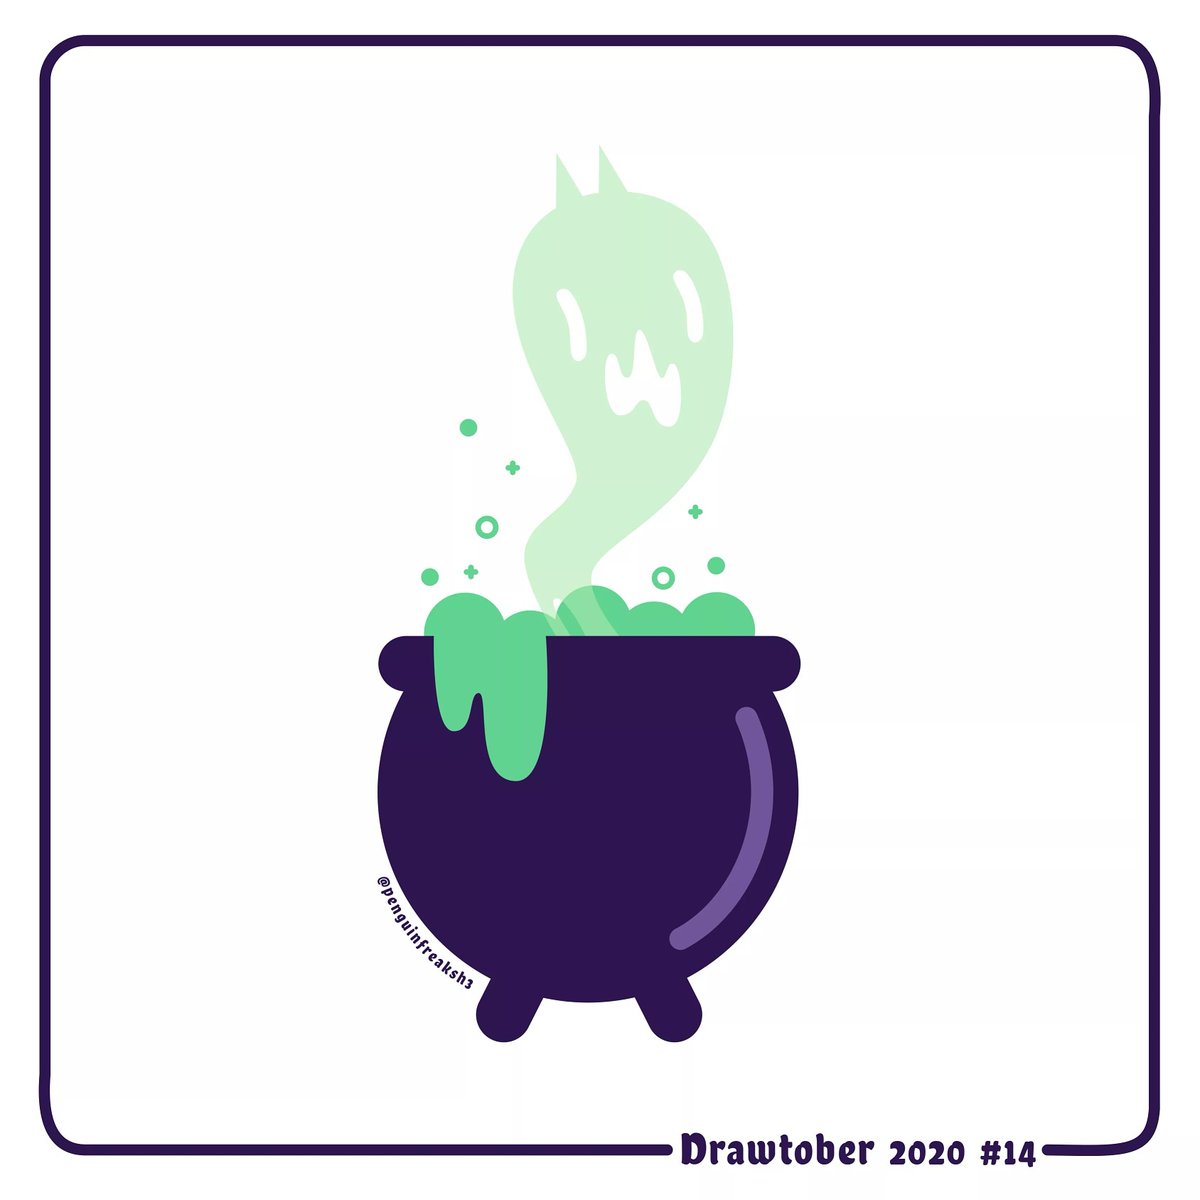 Witches Brew 🧙‍♀️

Just a simple drawing for today's Drawtober. How is everyone's week been so far? 

#penguinfreaksh3 #drawtober #drawlloween #Halloween #drawing #witchesbrew #cauldron #witchescauldron #illustration #illustrationoftheday #spooky #creepycute